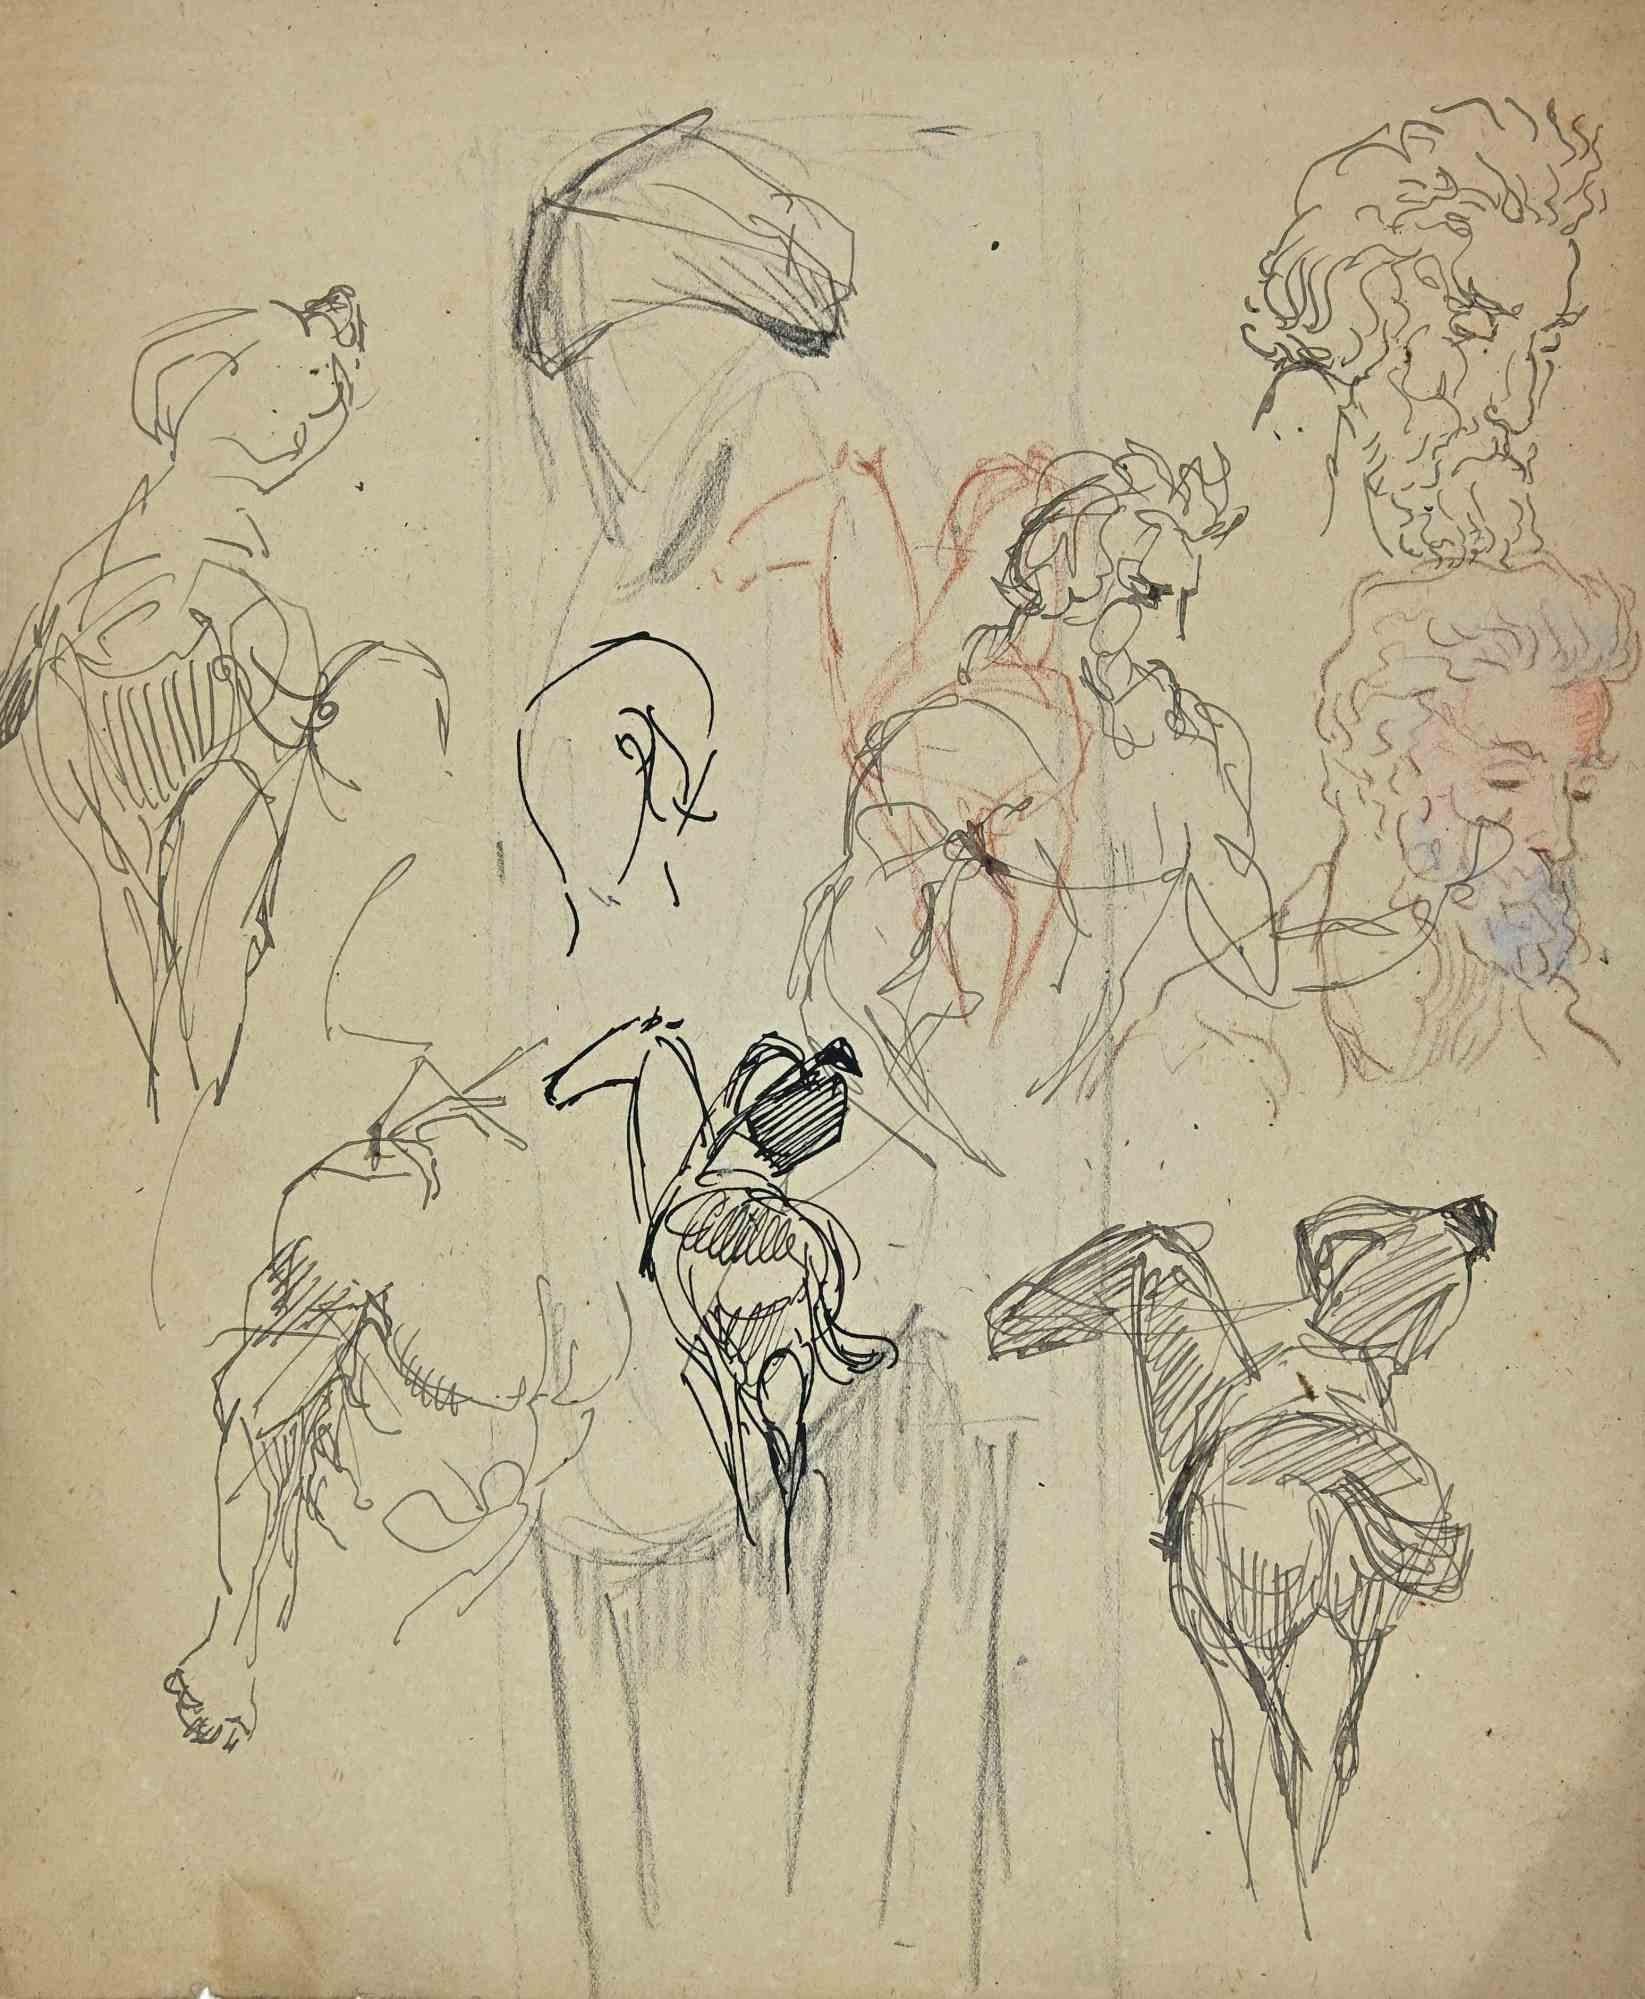 The Sketches of Figures is an original Drawing on paper realized by French painter Norbert Meyre in the mid-20 century.

Drawing in pencil and pen.

Good conditions.

The artwork is represented through deft and quick strokes by mastery.

Norbert